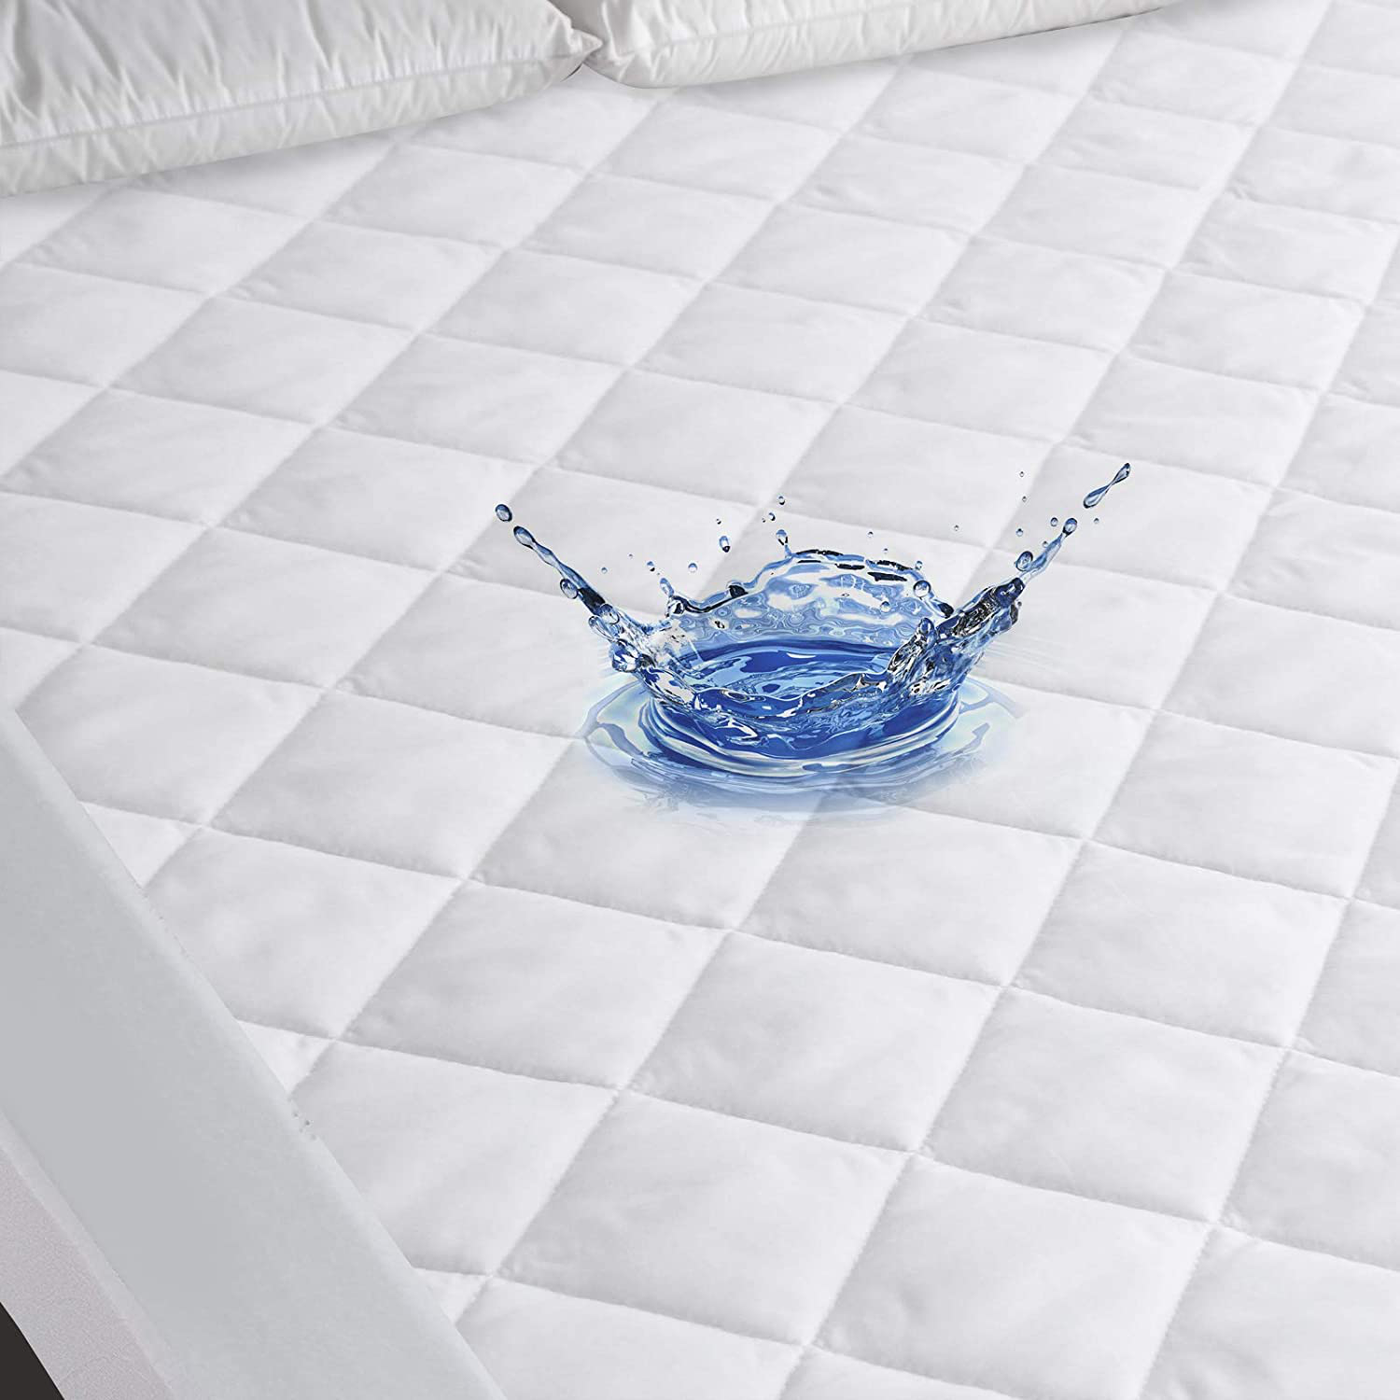 Twin Mattress Pad Protector Waterproof, Breathable Quilted Fitted Mattress Protector, Durable Mattress Cover Down Alternative Filling, Deep Pocket Stretches up to 14 Inch